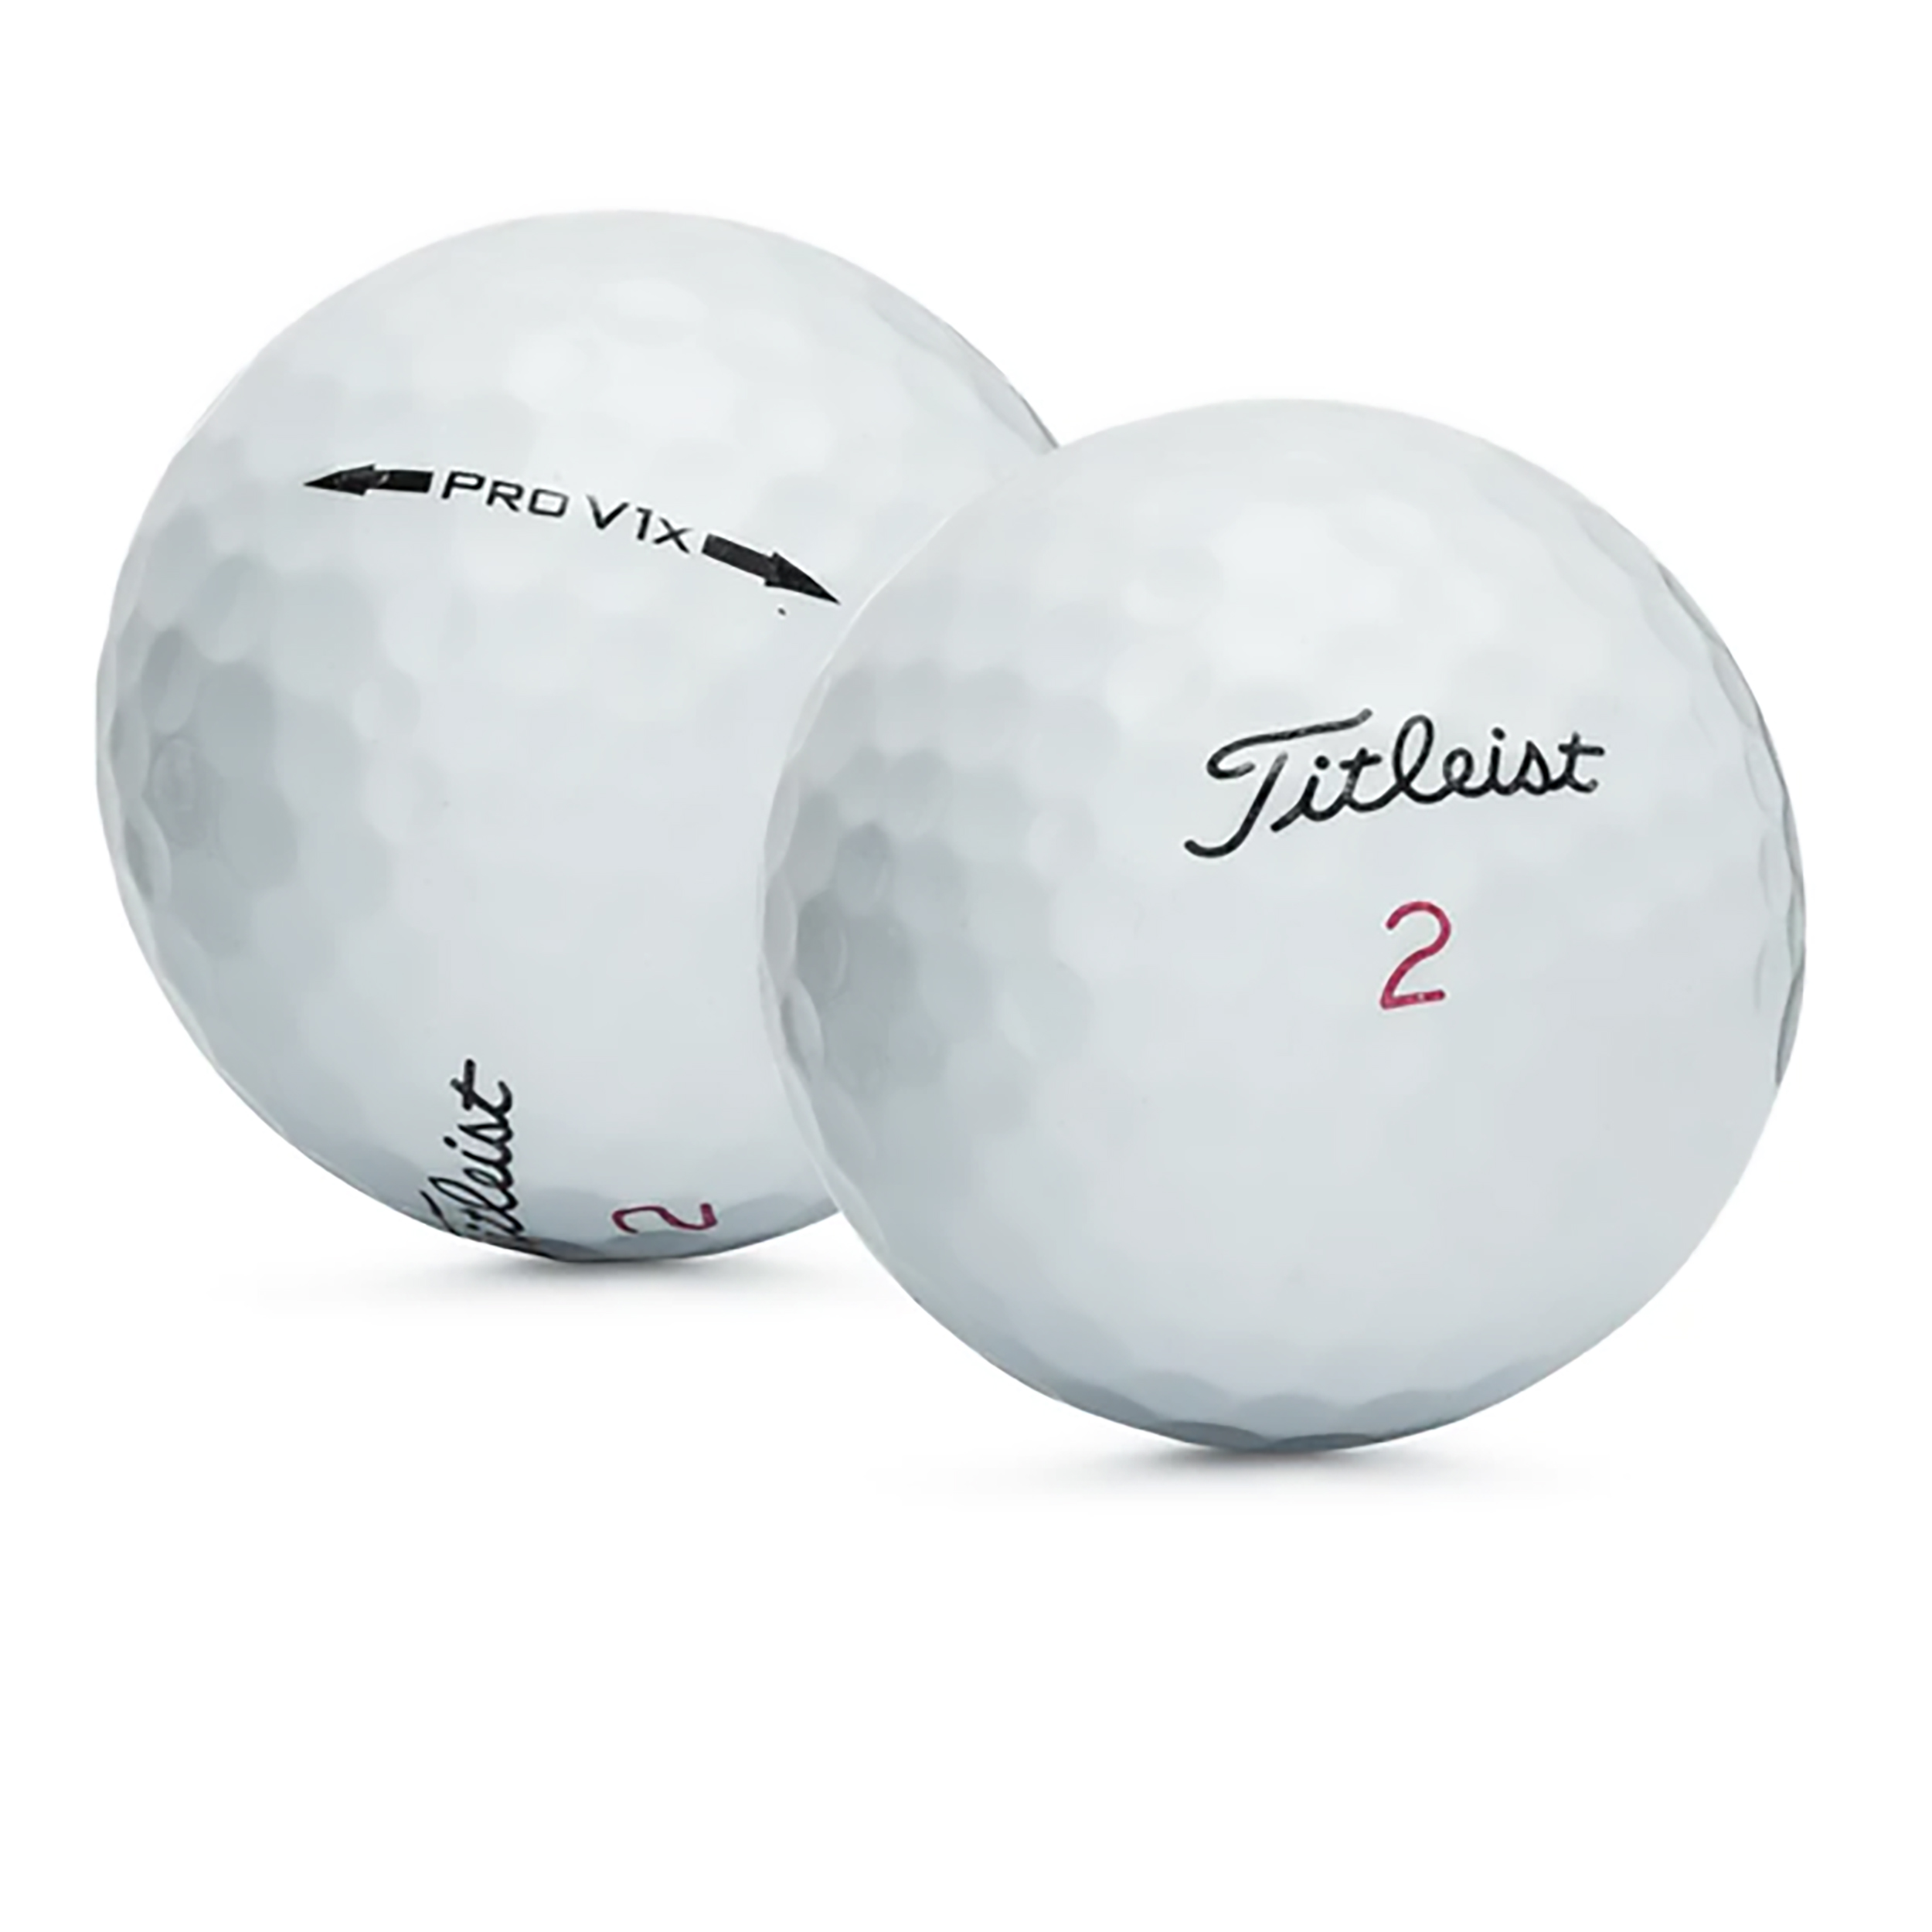 Titleist Pro V1x, Golf Balls, Mint, 5a, AAAAA Quality, 50 Pack, White - image 1 of 10